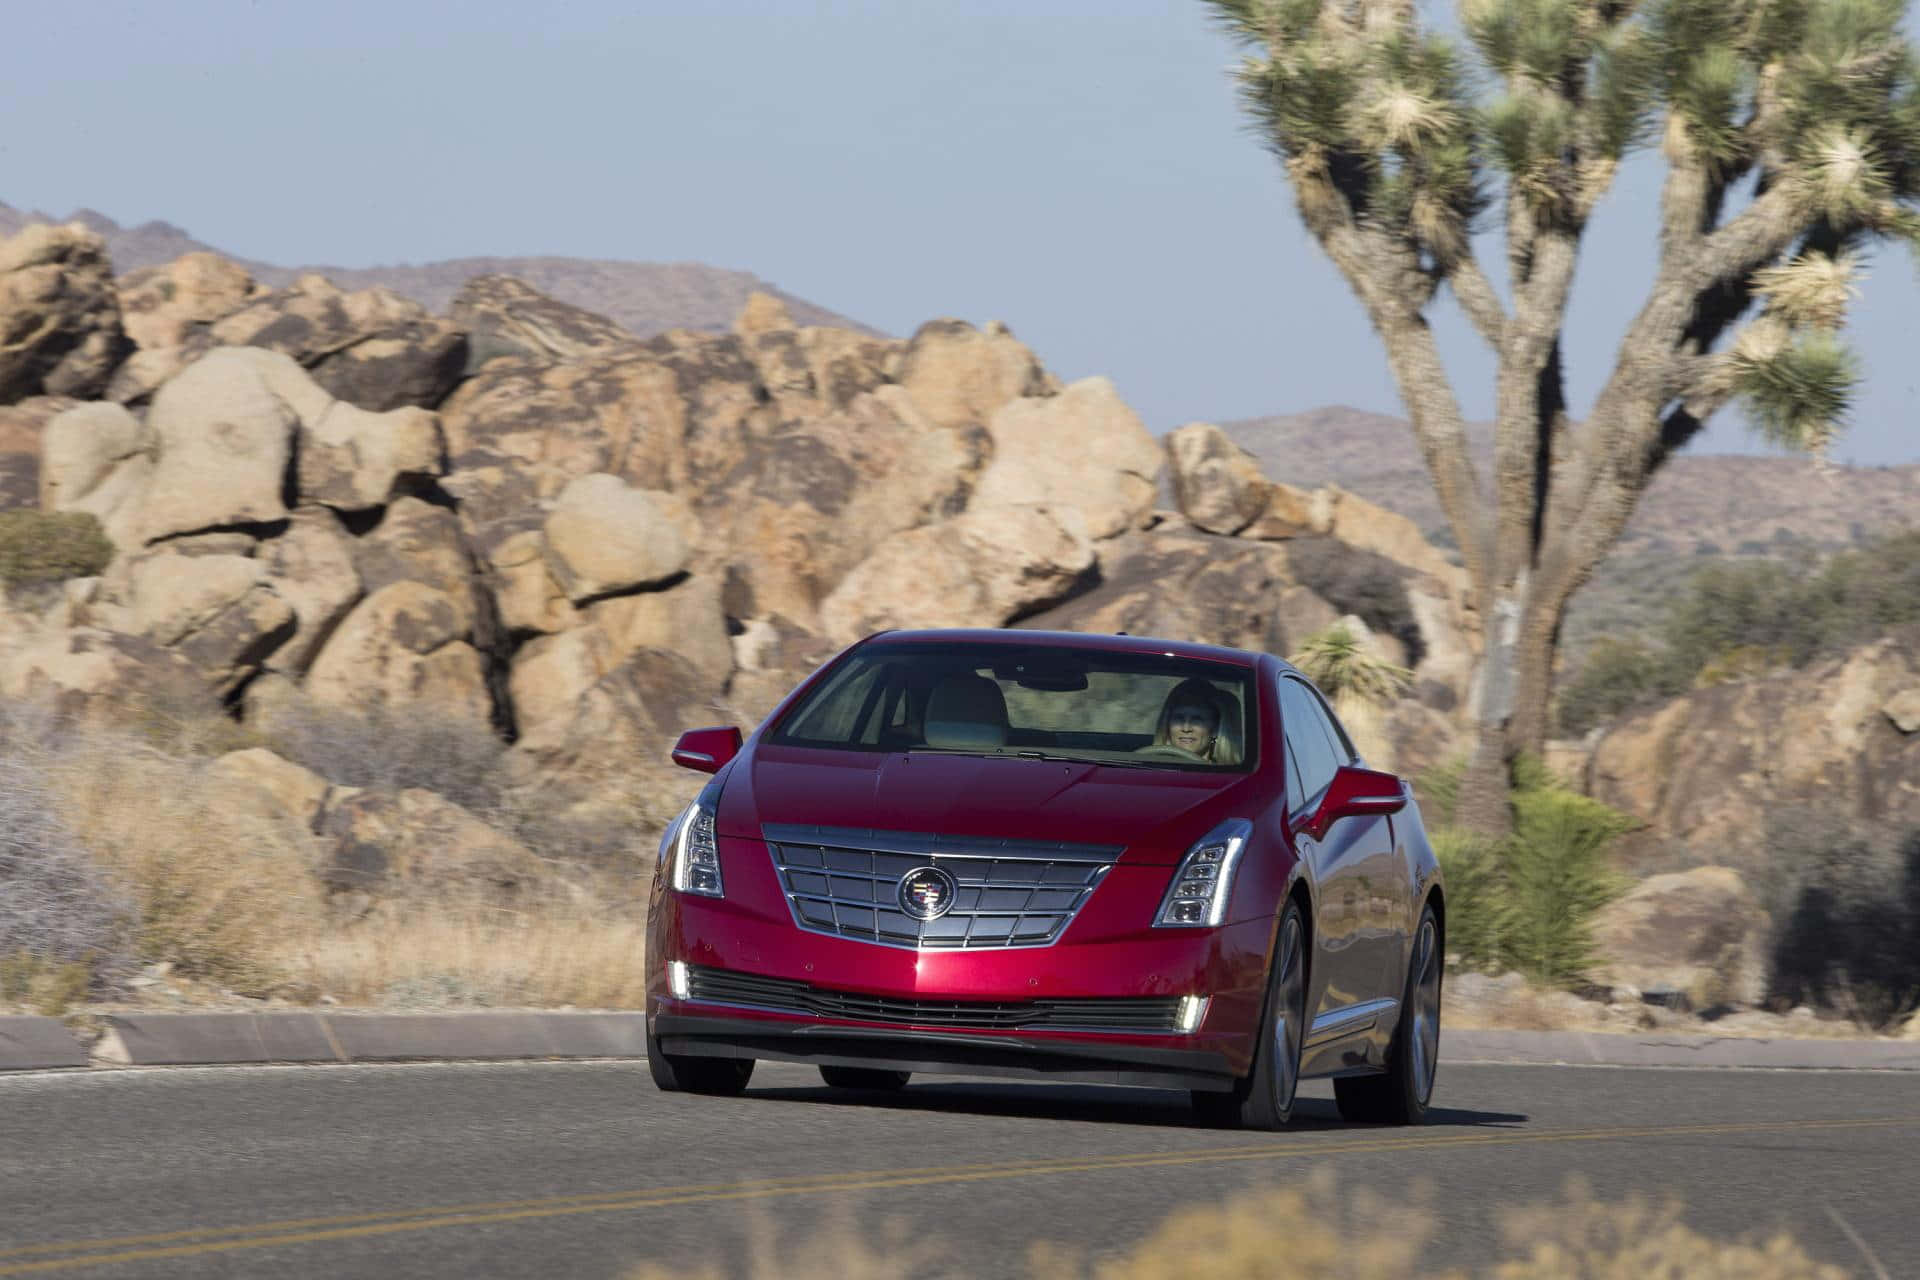 Stunning Cadillac ELR in High Definition Wallpaper